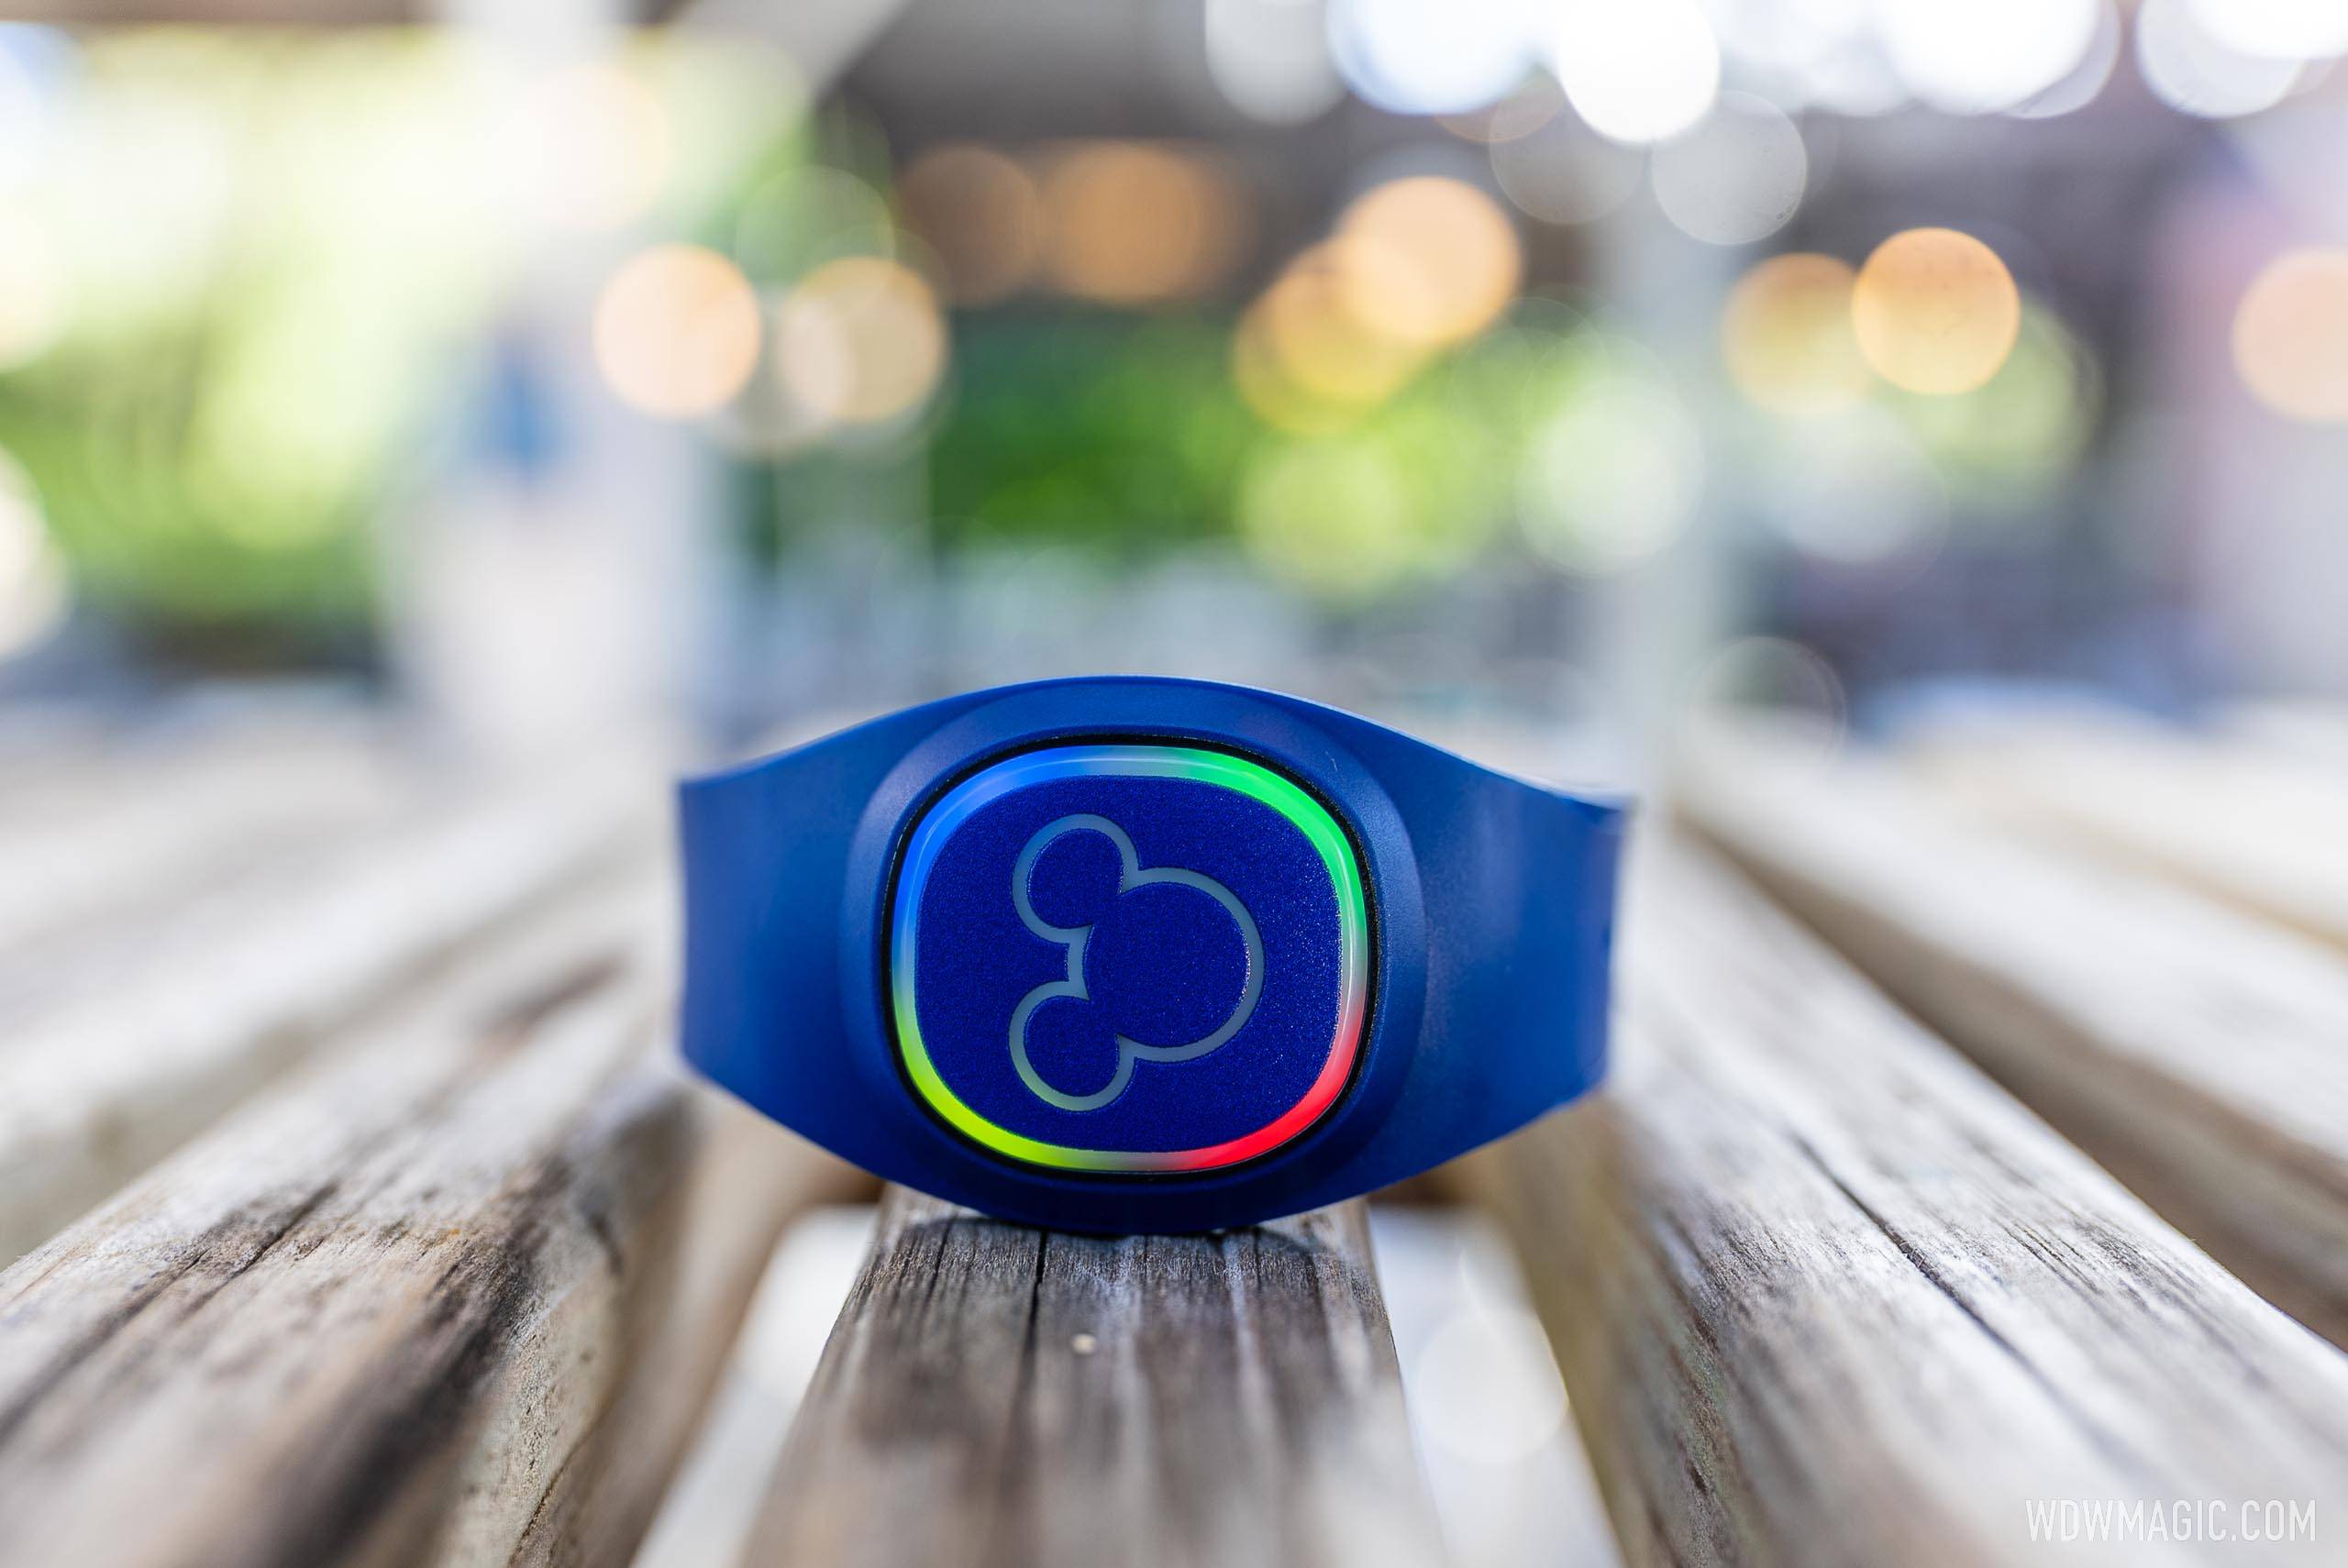 MagicBand+ is expected to come to Disney Cruise Line